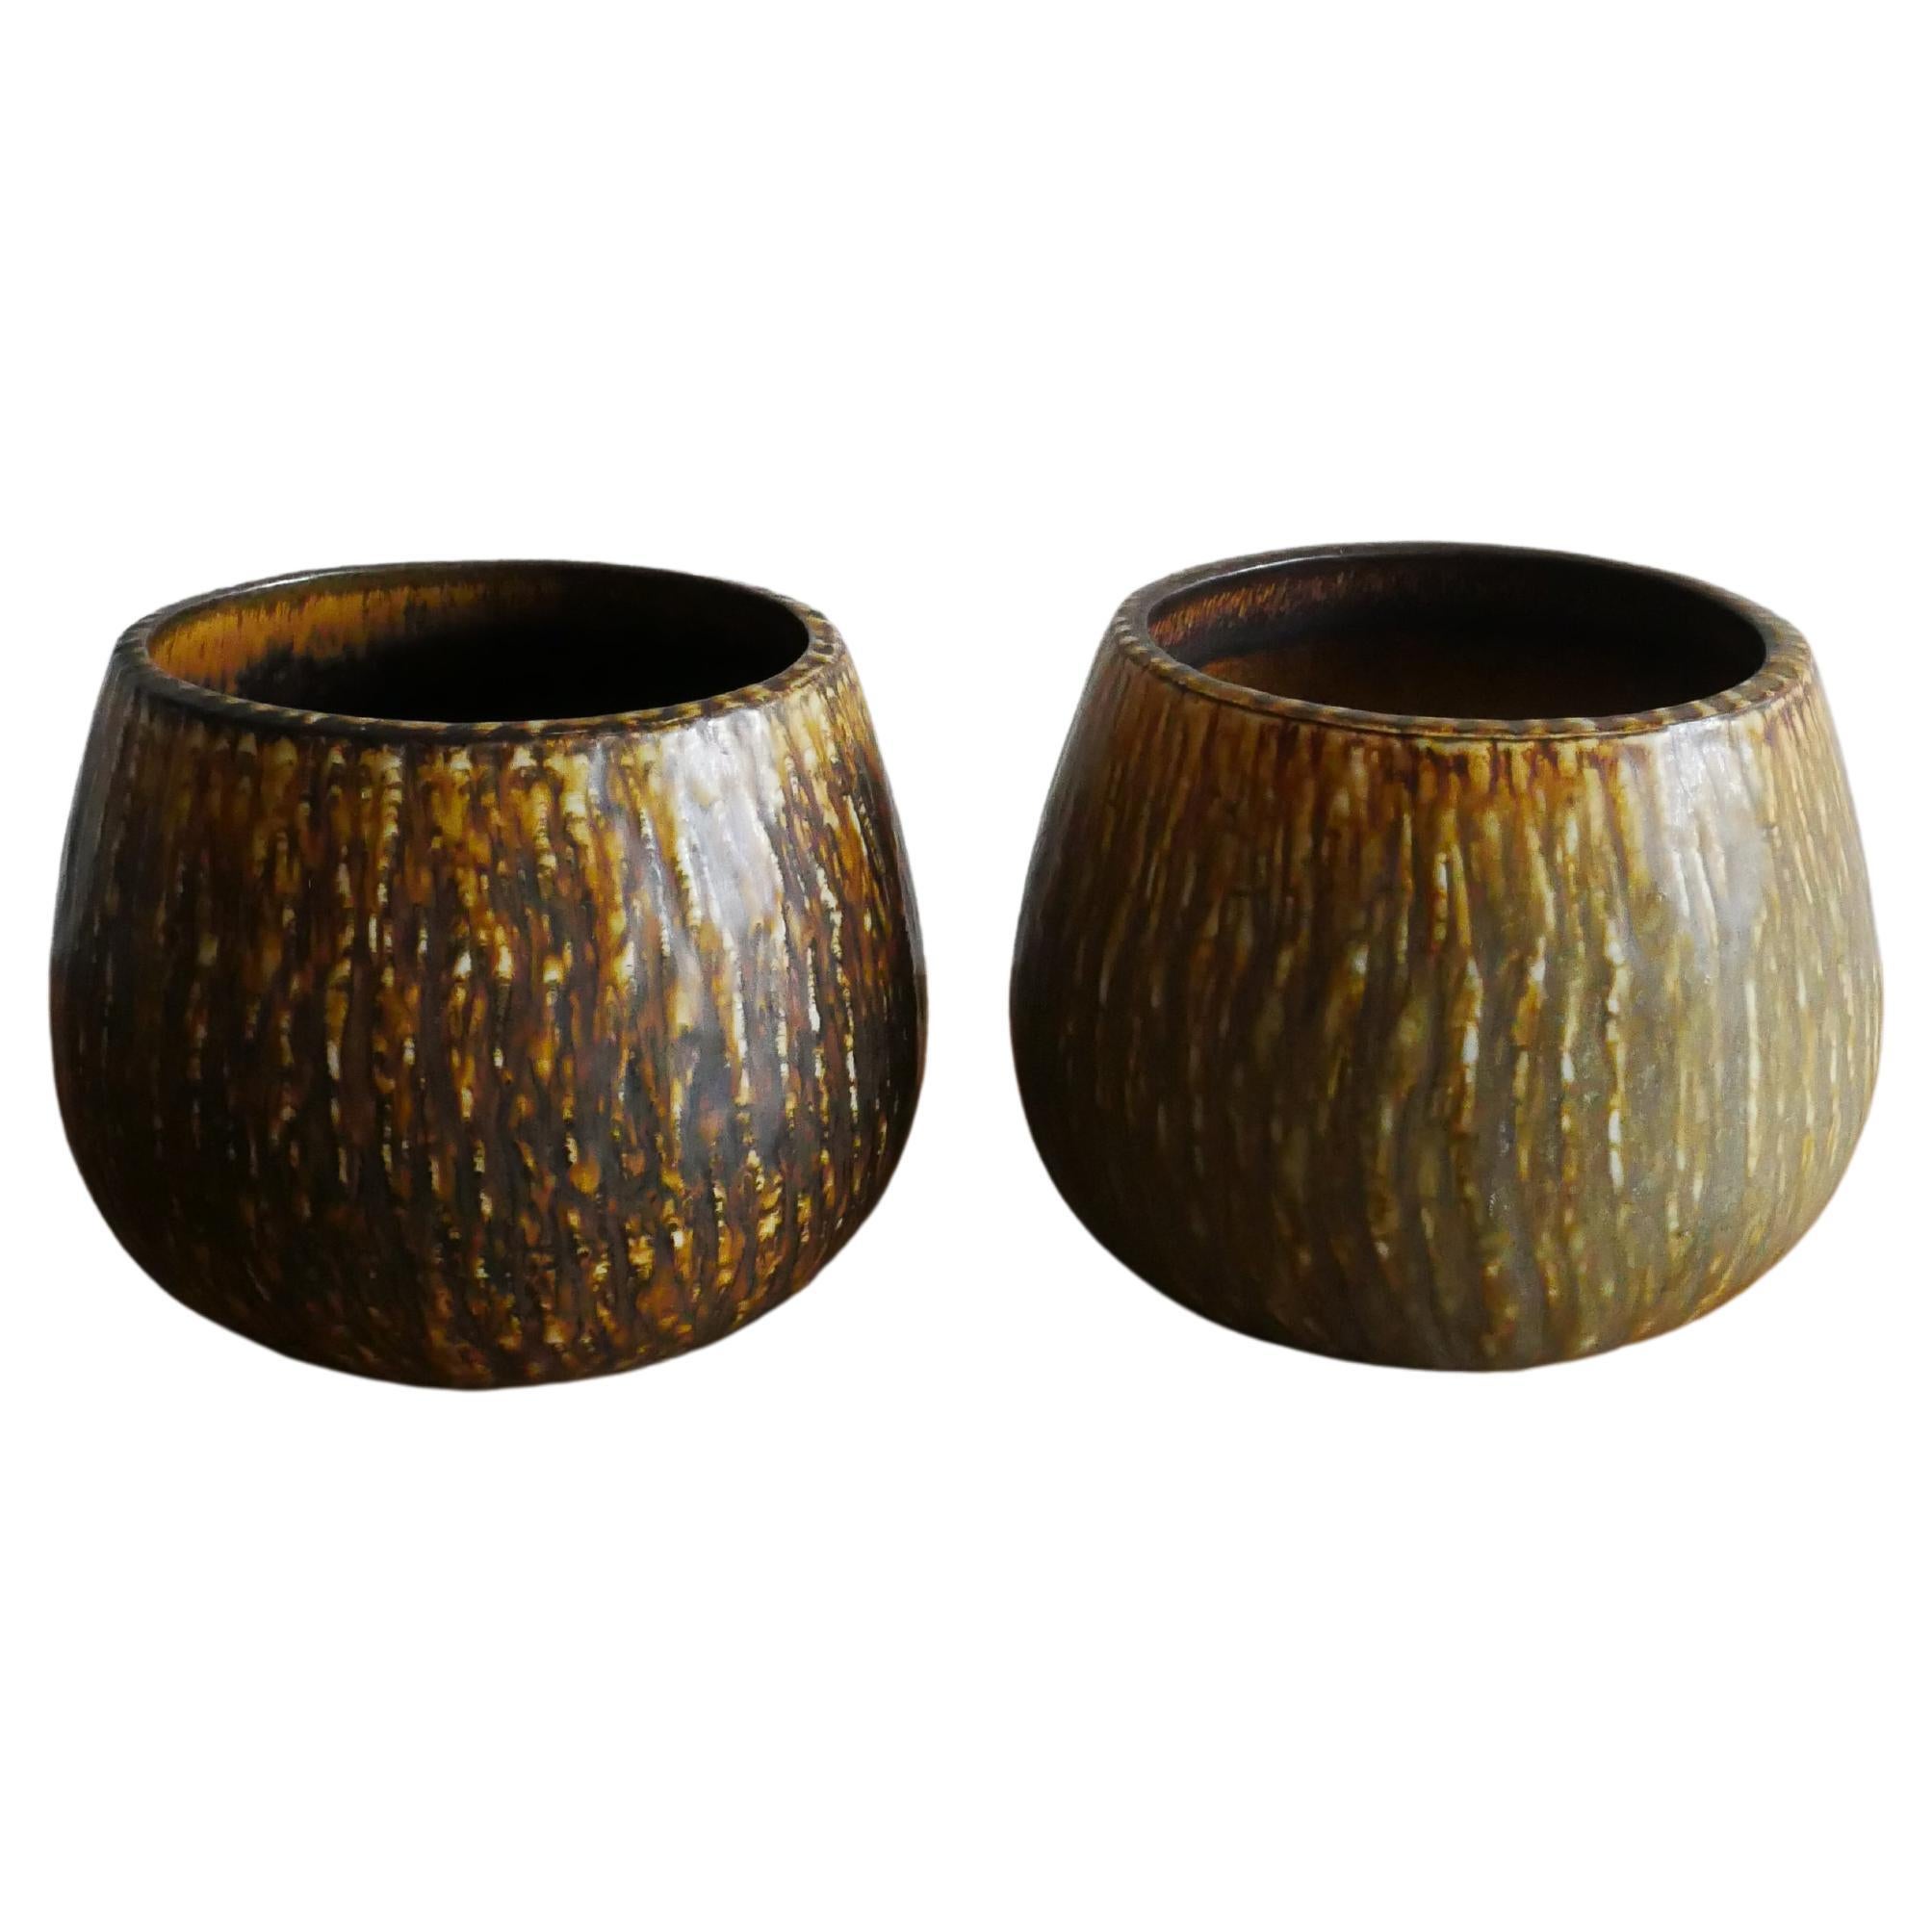 A Set of two Ceramic Bowls "Rubus" Gunnar Nylund for Rörstrand Sweden, 1950s For Sale